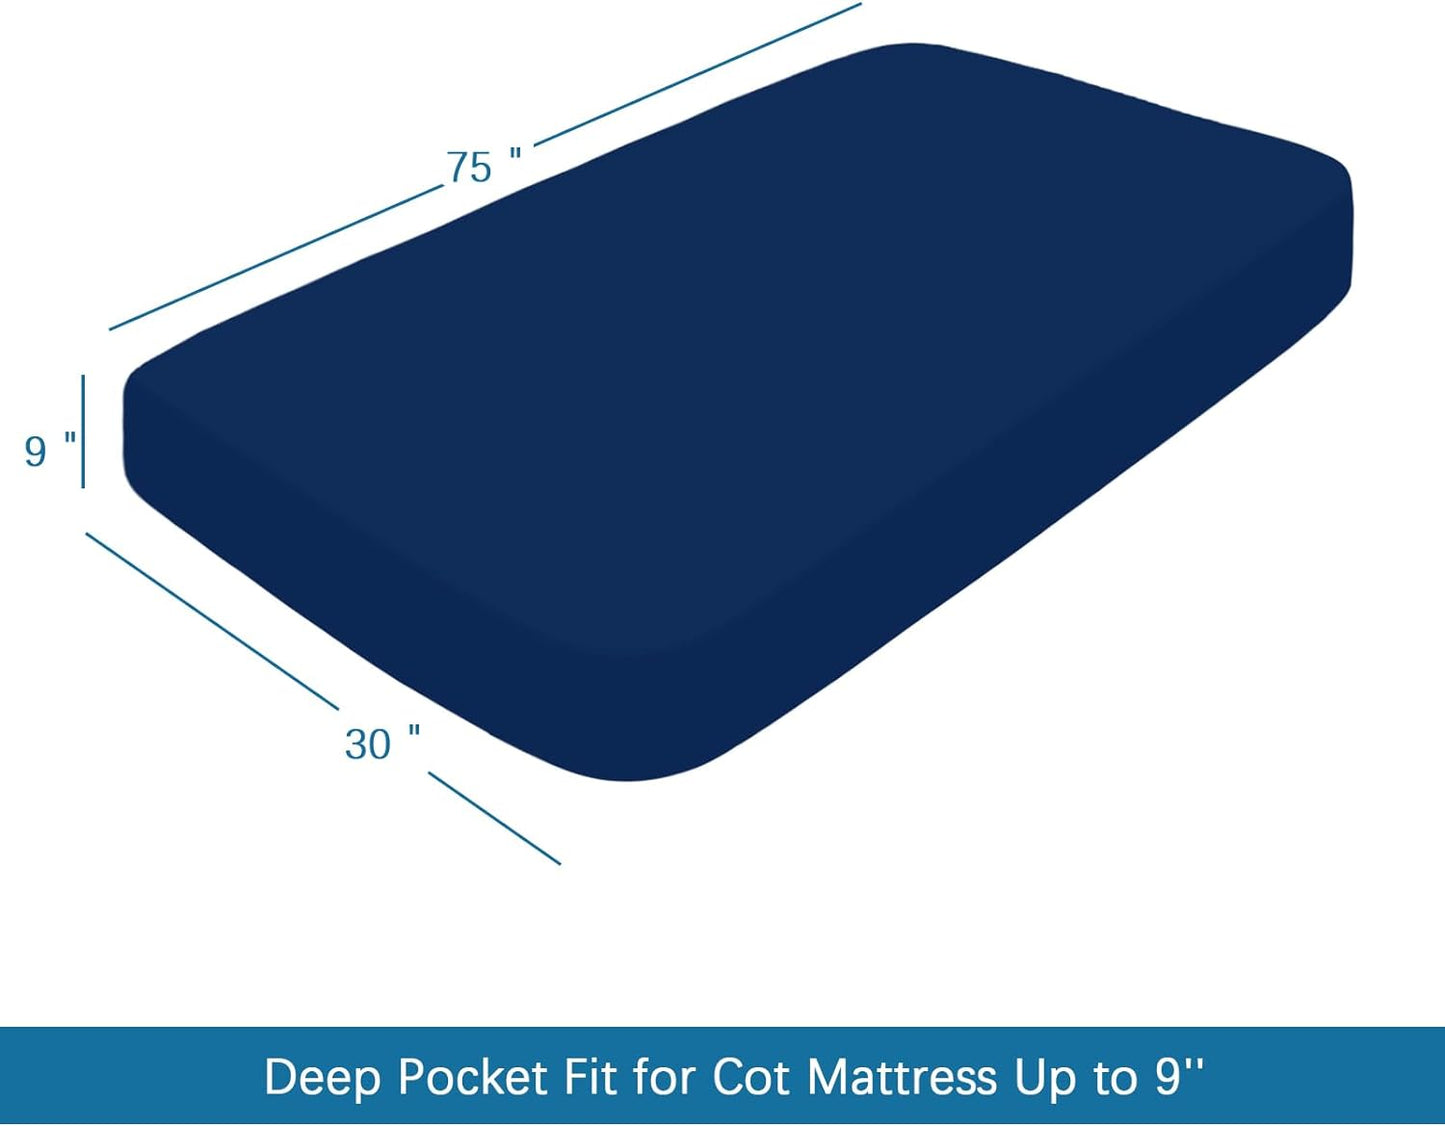 Cot Sheet Set - 4 Pieces, 30" x 75" x 9", Cot Fitted Sheets for Narrow Twin/Camp Bunk/Rvs Bunk/Guest Beds/Trifold Mattress, Navy